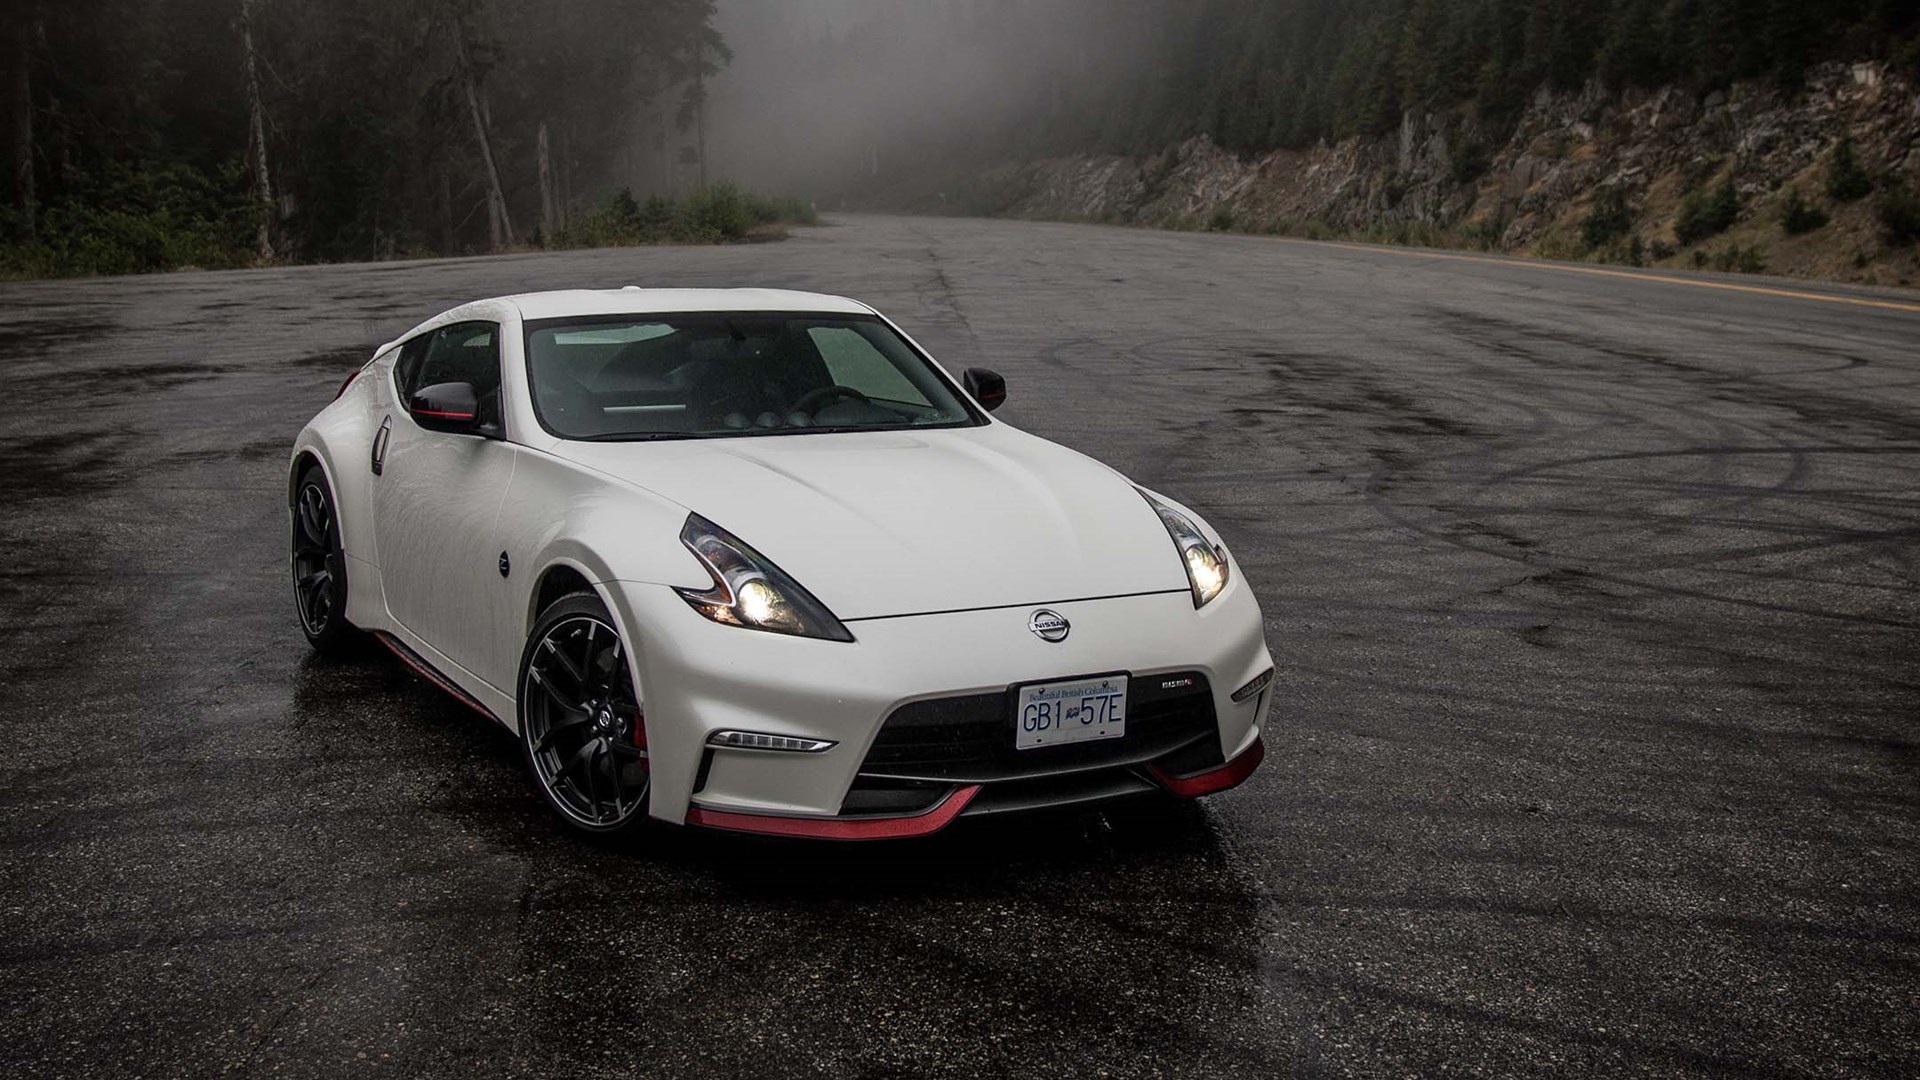 2018 Nissan 370Z Nismo Test Drive Review | AutoTrader.ca